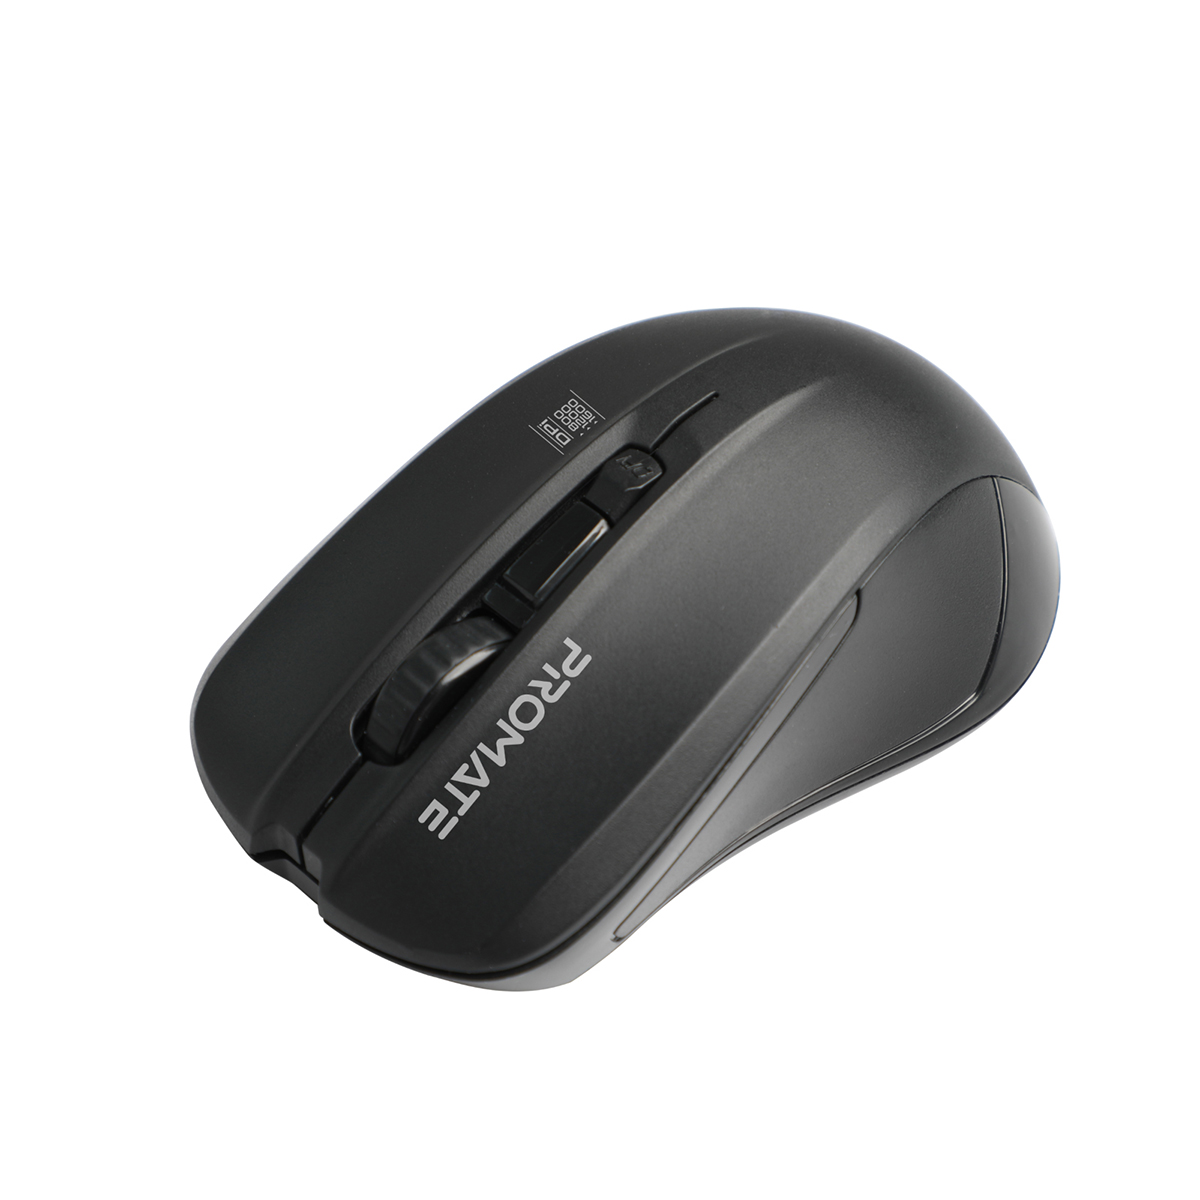 Promate Wireless Mouse, Comfortable Ambidextrous 2.4GHz Cordless Ergonomic Mice with 4 Programmable Buttons, Adjustable 1600DPI, Nano USB Receiver and 10m Working Range for Laptops, Contour Black